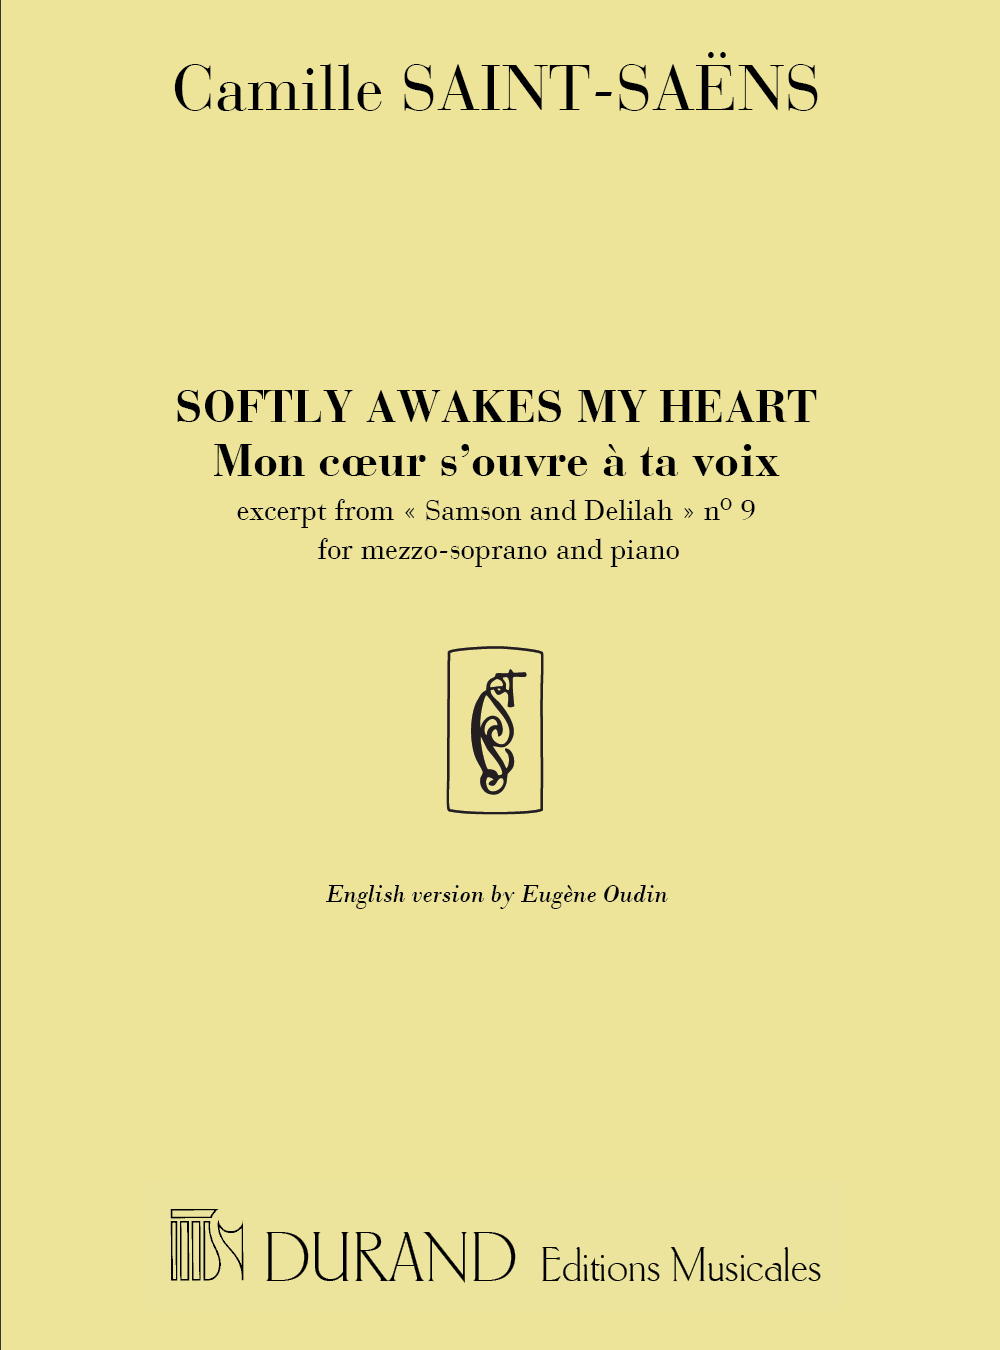 Camille Saint-Saëns: Softly awakes my heart-Mon coeur s'ouvre à ta voix: Vocal